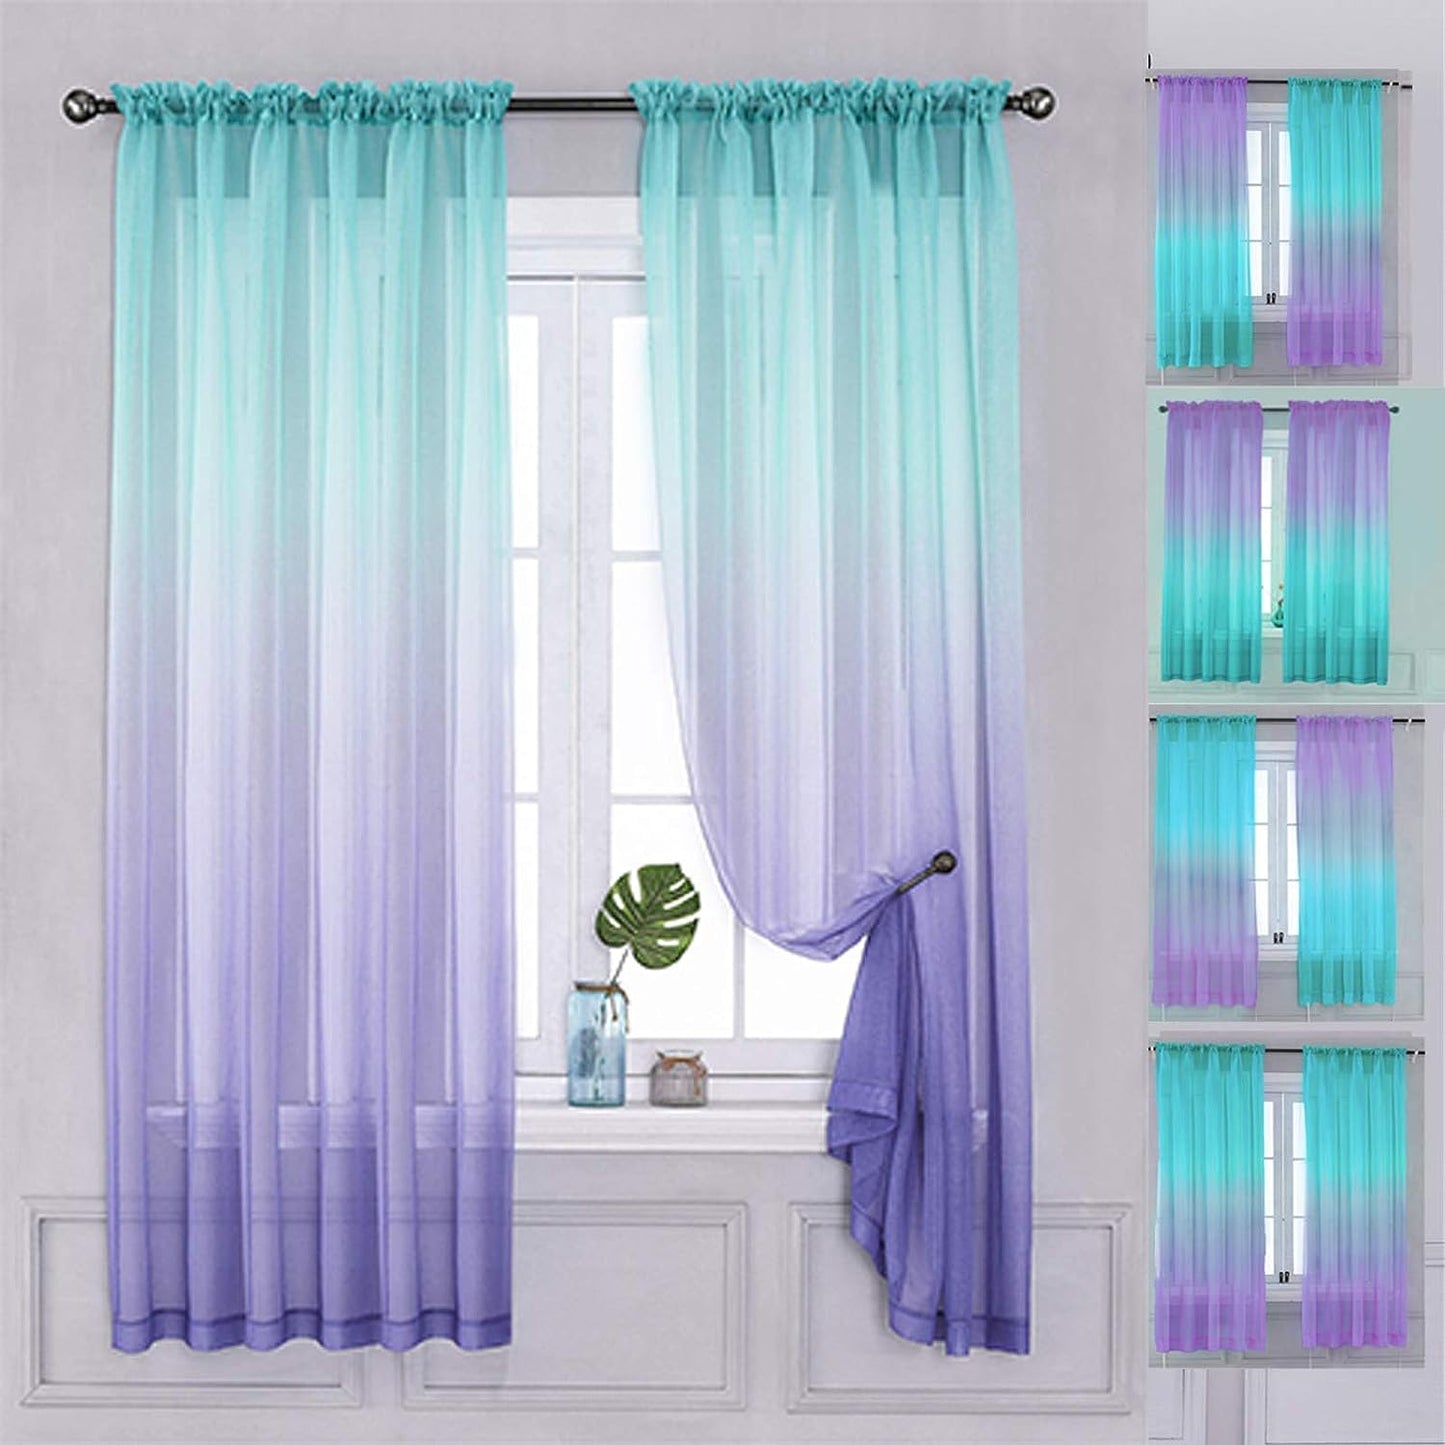 Yancorp 2 Panel Sets Semi Bedroom Curtains 63 Inch Length Sheer Rod Pocket Curtain Linen Teal Turquoise Purple Ombre Girls Living Room Mermaid Bedroom Nursery Kids Decor (Turquoise Purple, 40"X63")  Yancorp Turquoise Purple 52"X84" 